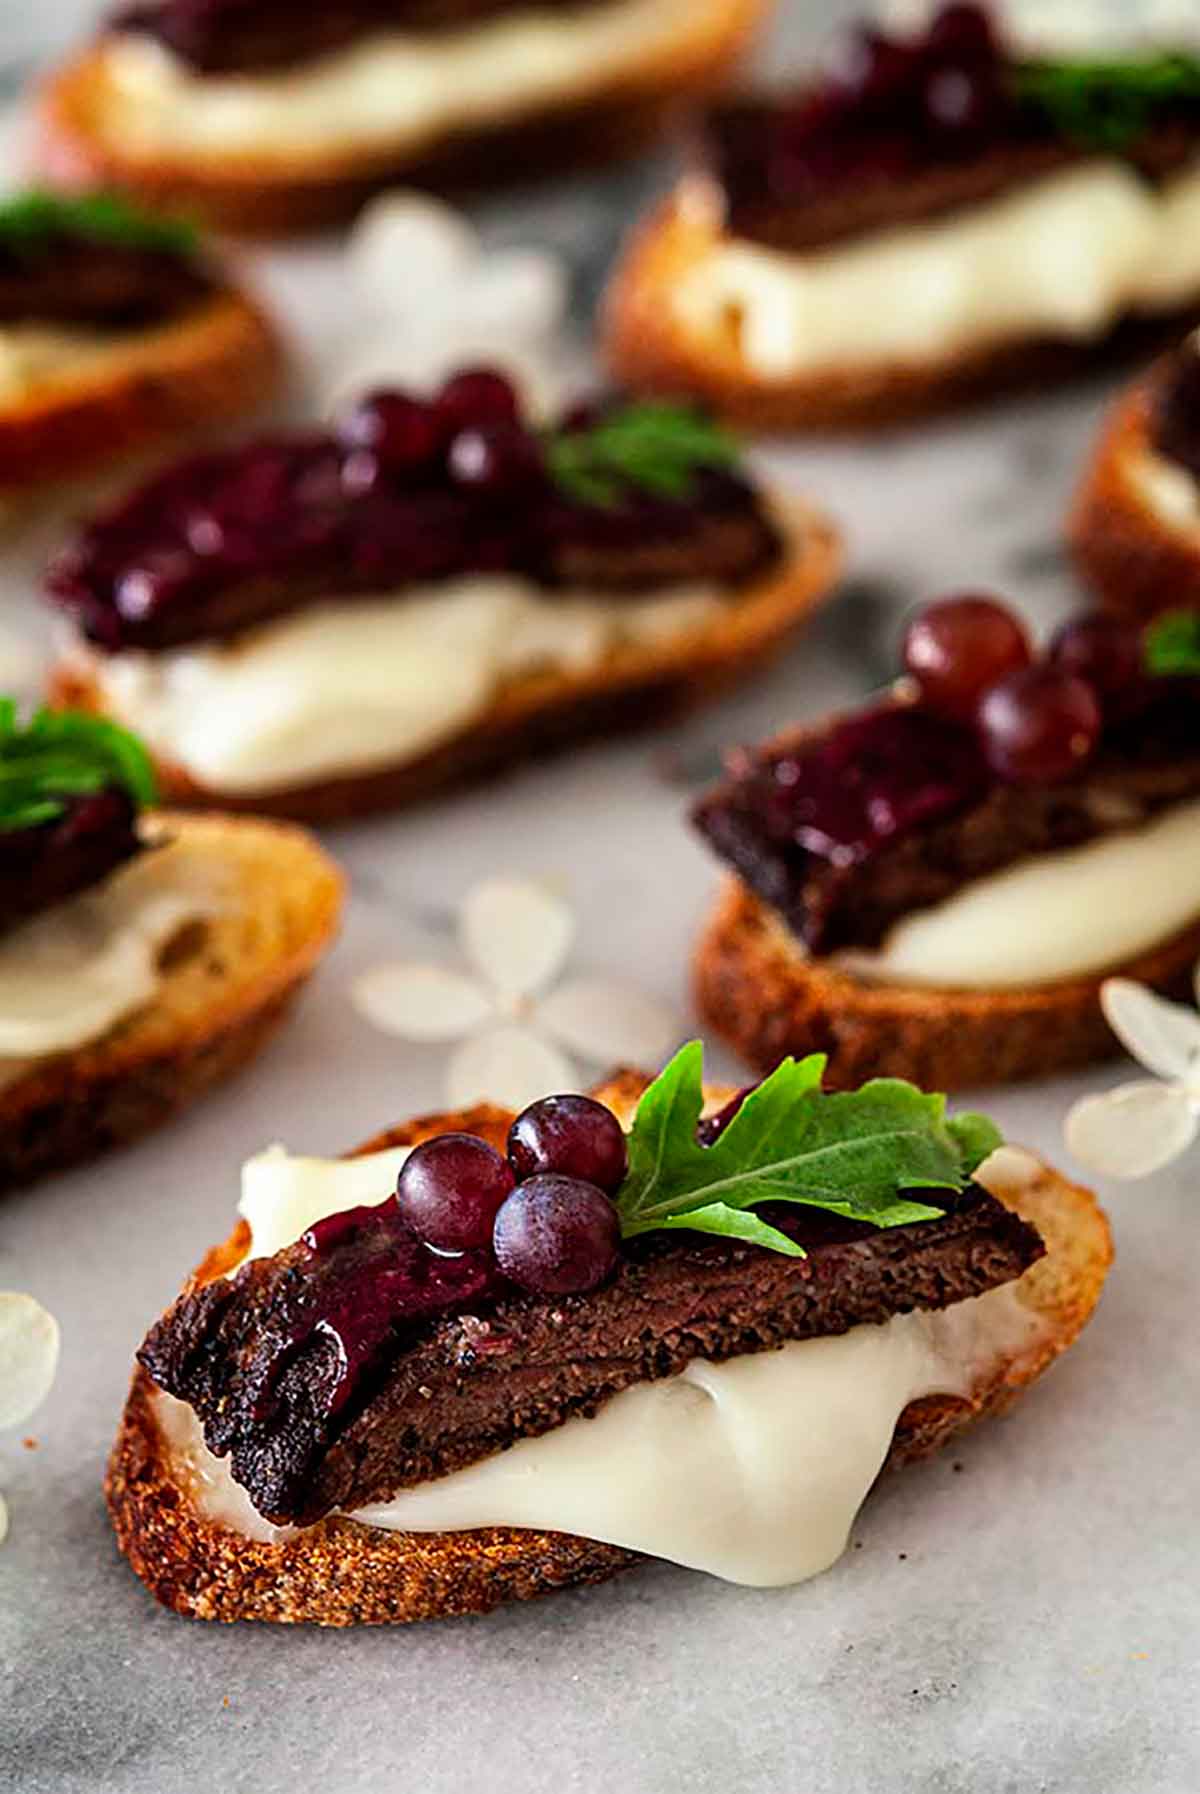 7 steak appetizers on a marble slate, garnished with tiny grapes, arugula and dripping cheese.